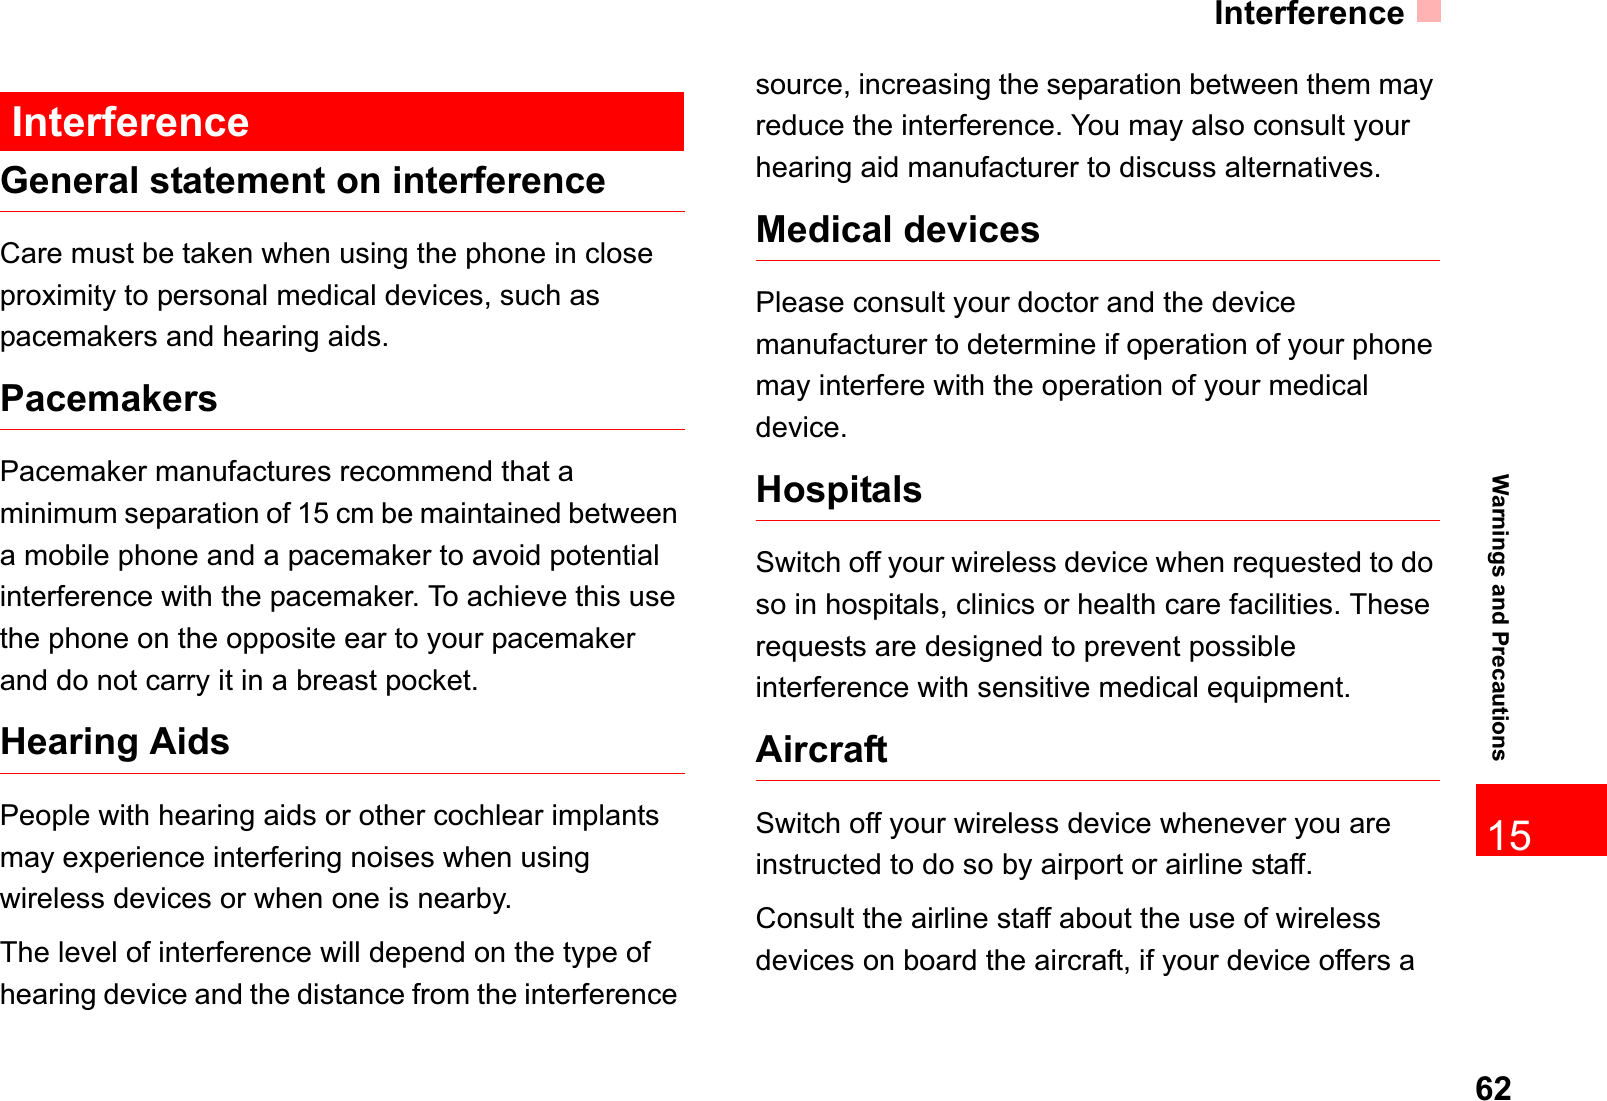 Interference6215Warnings and PrecautionsInterferenceGeneral statement on interferenceCare must be taken when using the phone in close proximity to personal medical devices, such as pacemakers and hearing aids.PacemakersPacemaker manufactures recommend that a minimum separation of 15 cm be maintained between a mobile phone and a pacemaker to avoid potential interference with the pacemaker. To achieve this use the phone on the opposite ear to your pacemaker and do not carry it in a breast pocket. Hearing AidsPeople with hearing aids or other cochlear implants may experience interfering noises when using wireless devices or when one is nearby.The level of interference will depend on the type of hearing device and the distance from the interference source, increasing the separation between them may reduce the interference. You may also consult your hearing aid manufacturer to discuss alternatives.Medical devicesPlease consult your doctor and the device manufacturer to determine if operation of your phone may interfere with the operation of your medical device.HospitalsSwitch off your wireless device when requested to do so in hospitals, clinics or health care facilities. These requests are designed to prevent possible interference with sensitive medical equipment.AircraftSwitch off your wireless device whenever you are instructed to do so by airport or airline staff.Consult the airline staff about the use of wireless devices on board the aircraft, if your device offers a 